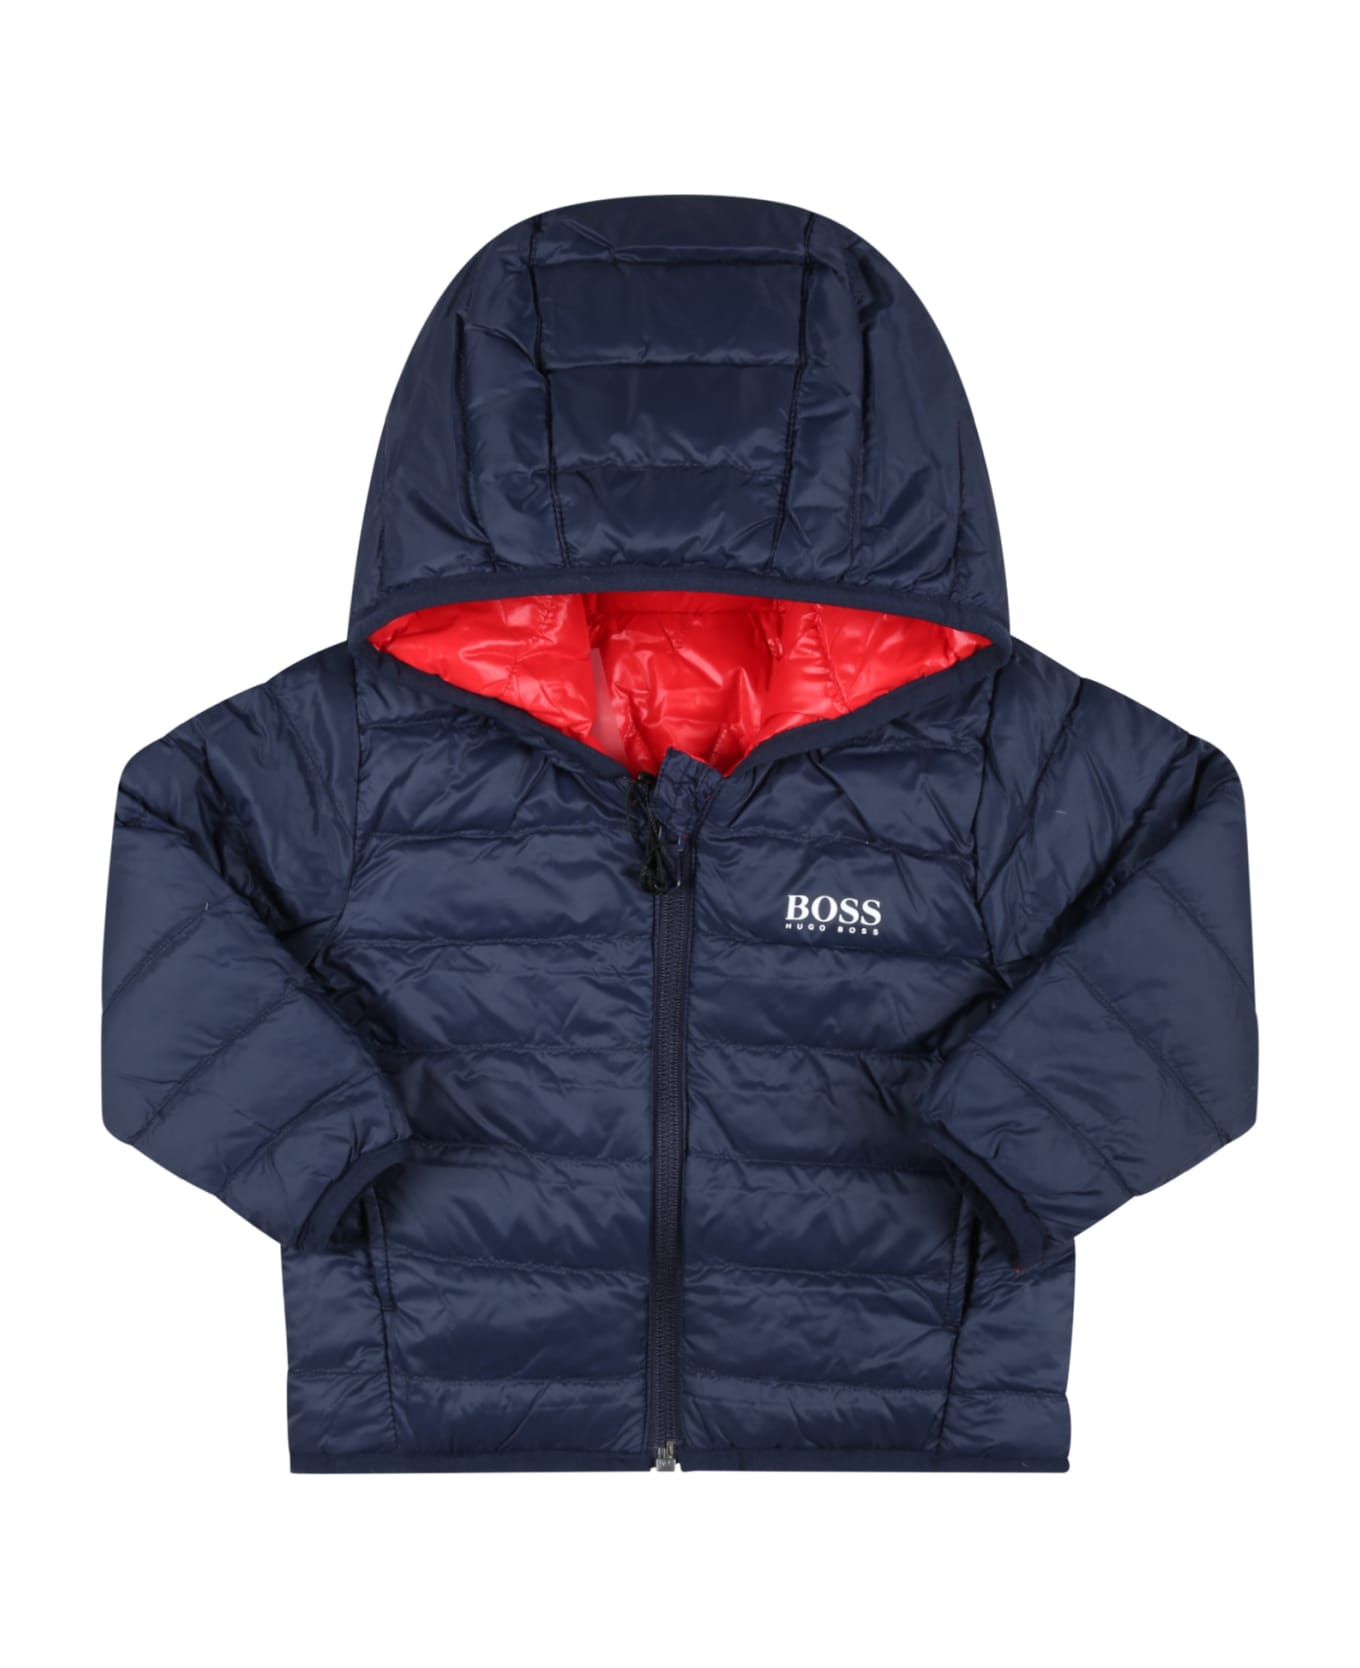 Hugo Boss Multicolor Jacket For Baby Boy With Logo - Red